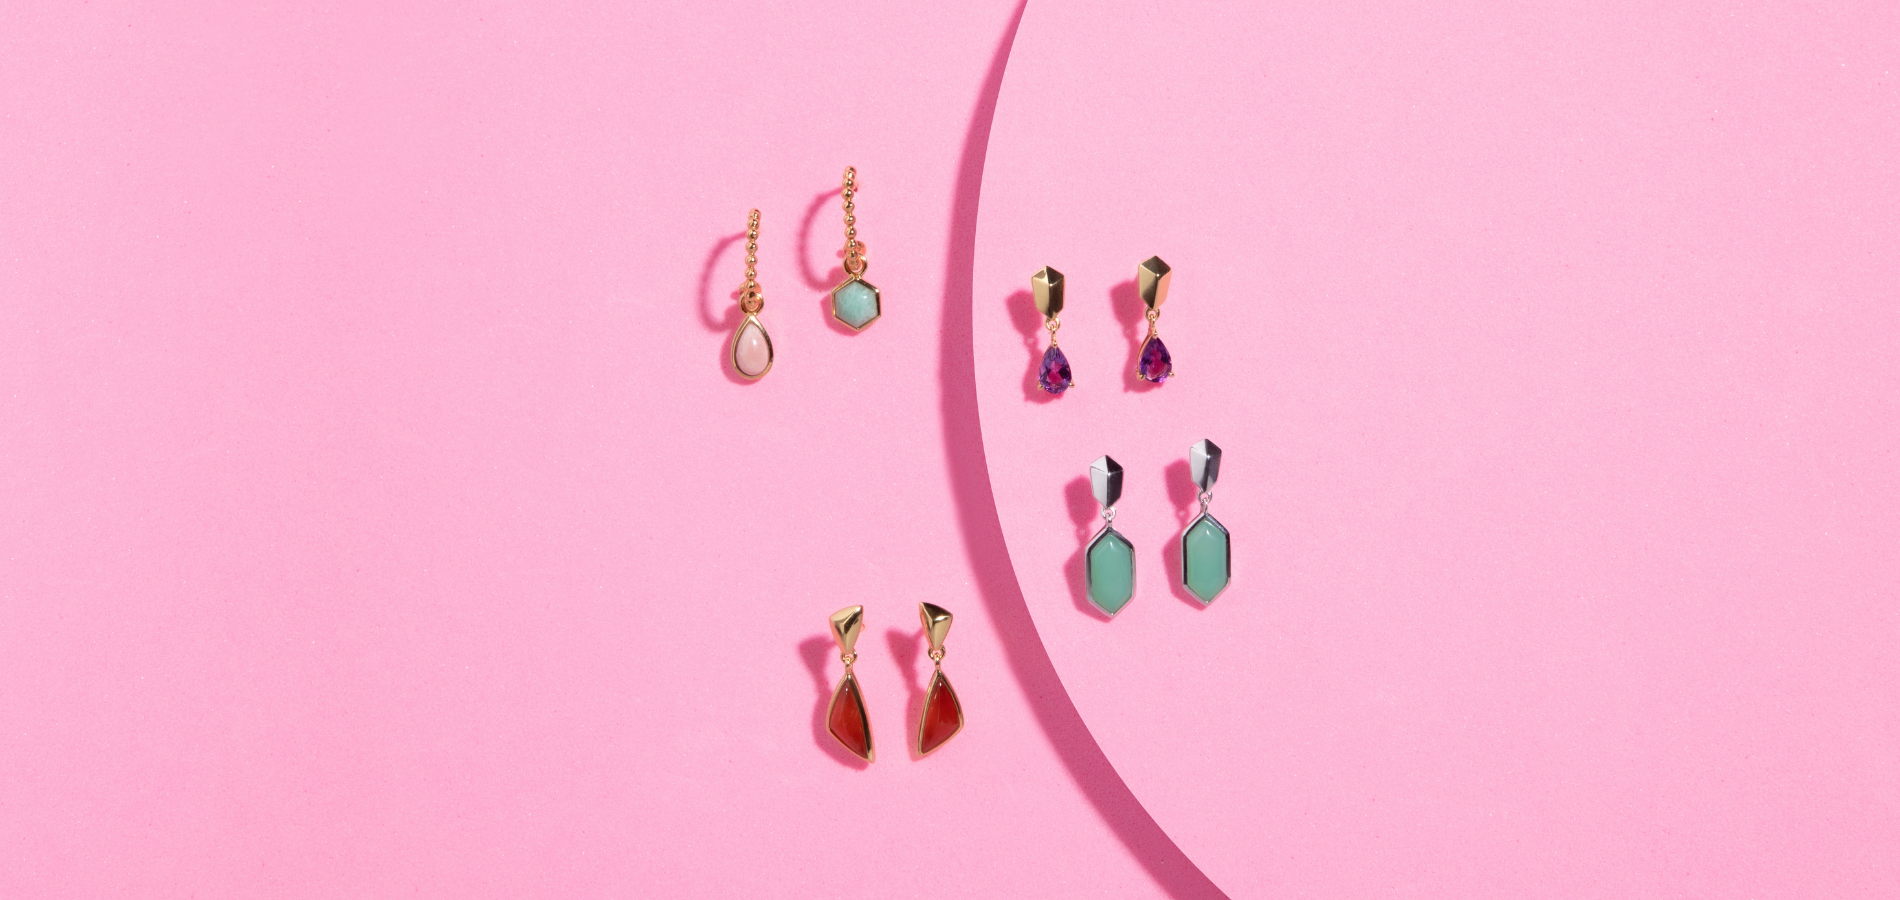 Happy New Pairs! Earring Trends for 2021